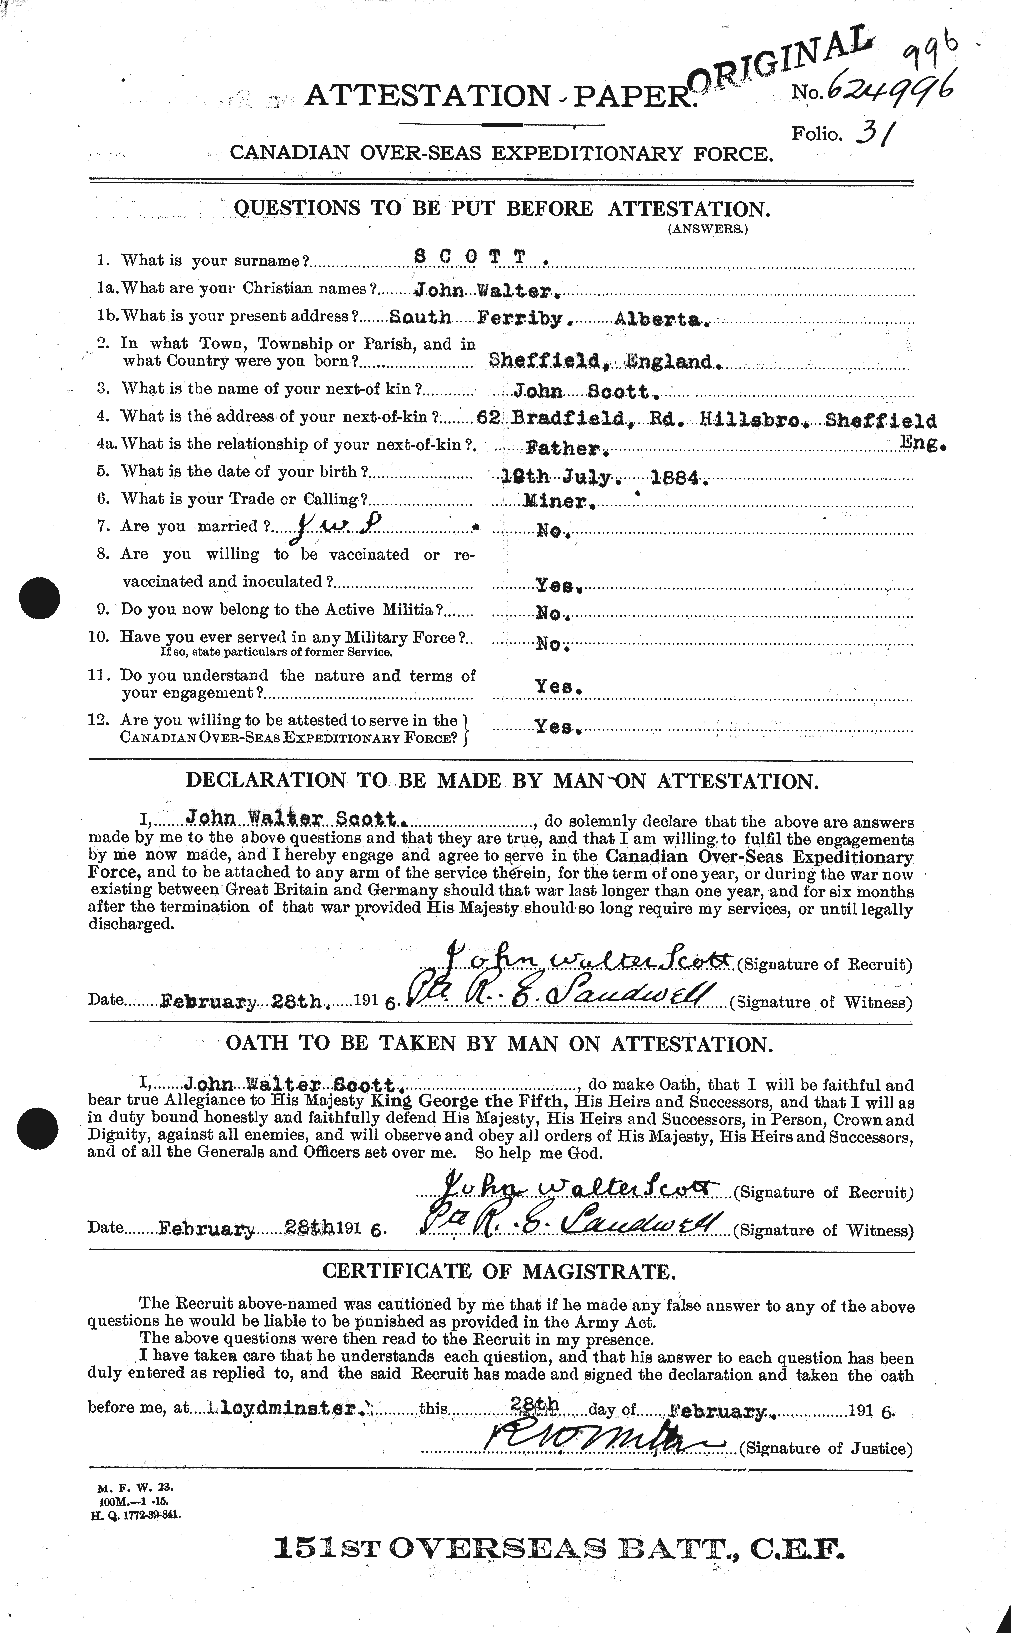 Personnel Records of the First World War - CEF 084412a